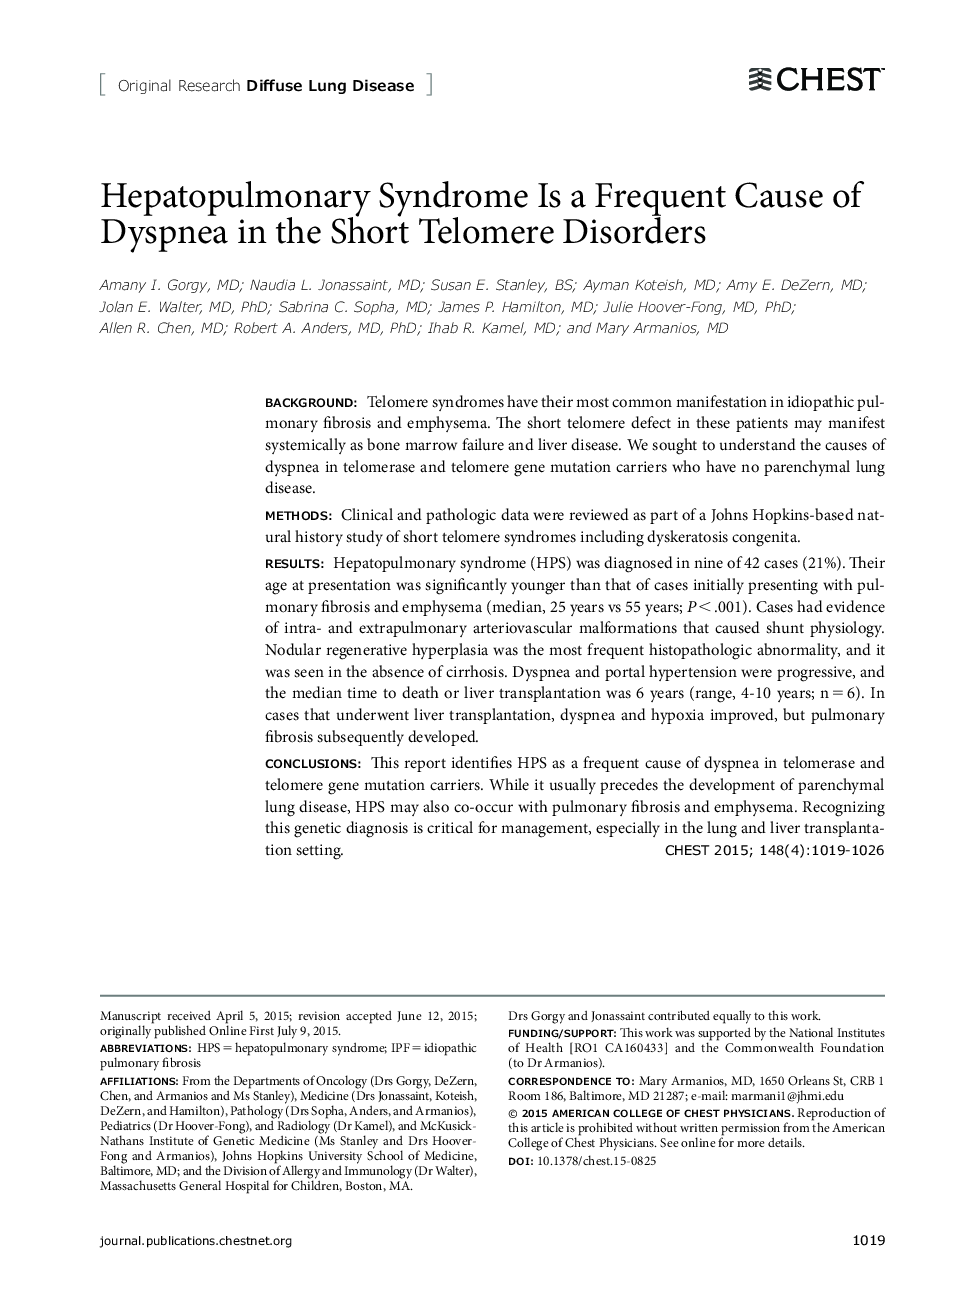 Hepatopulmonary Syndrome Is a Frequent Cause of Dyspnea in the Short Telomere Disorders